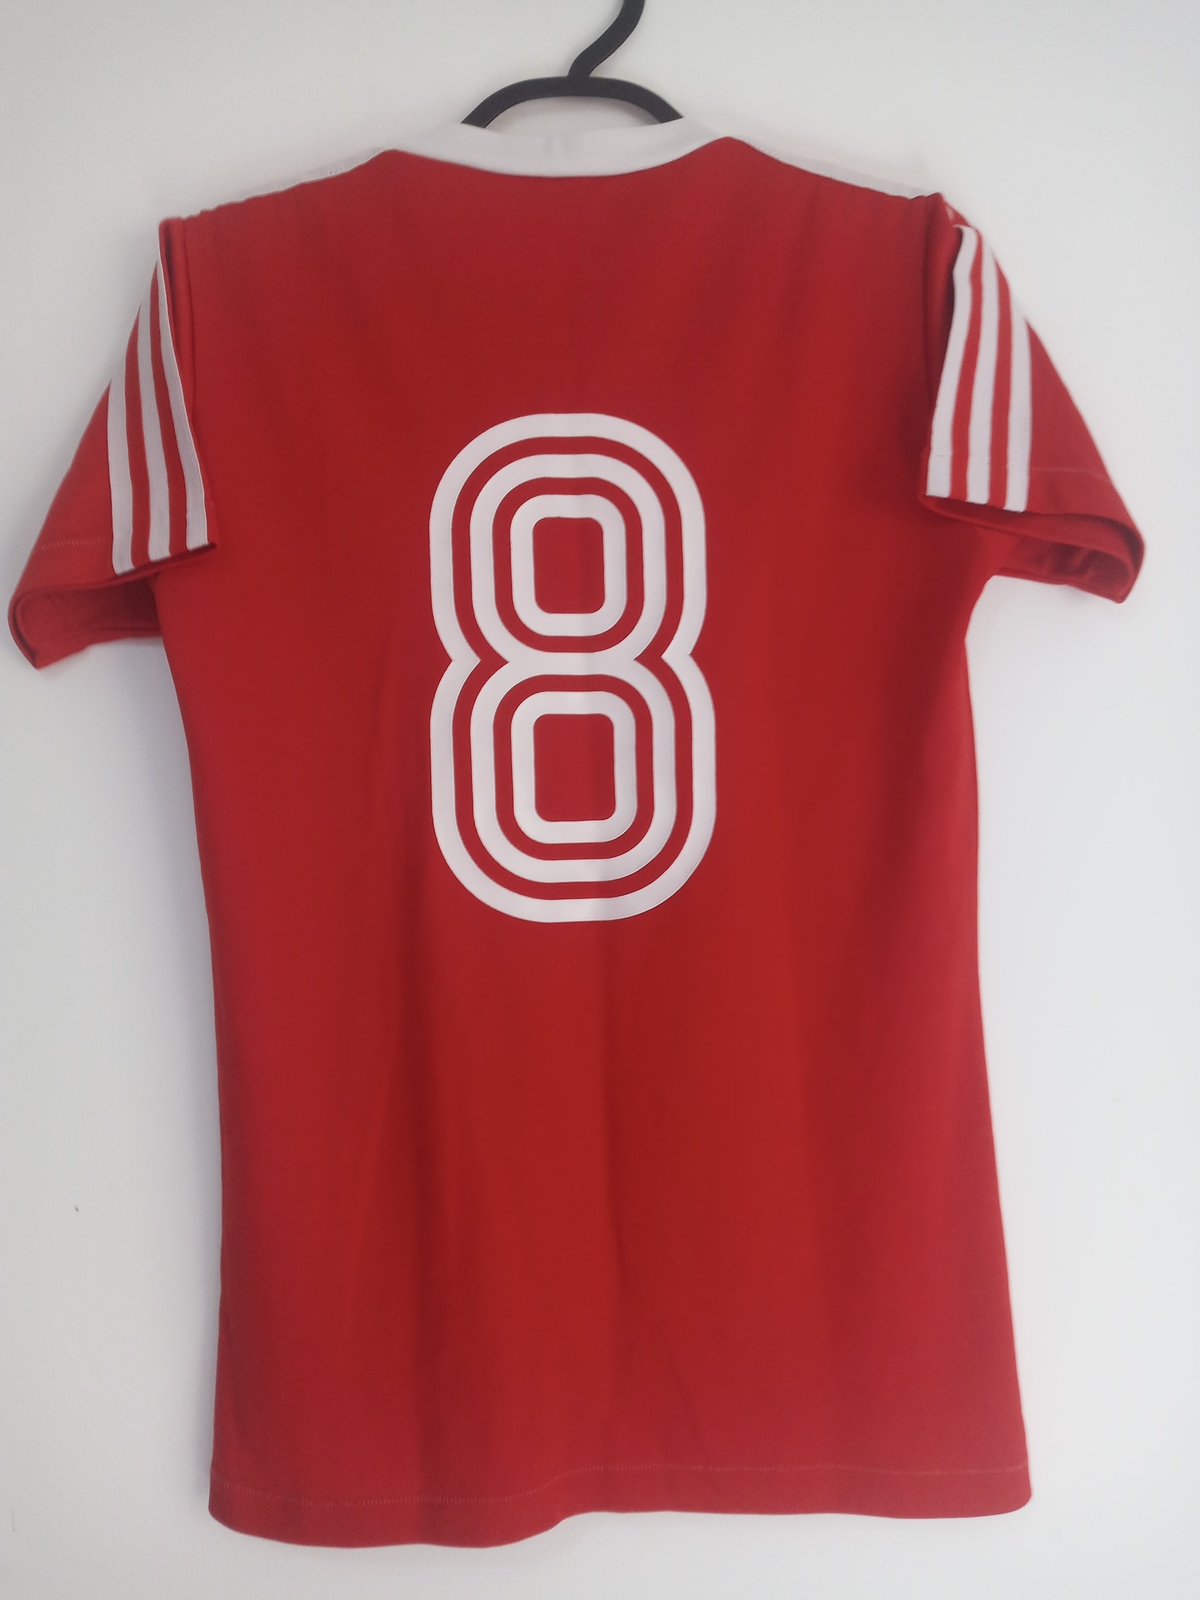 Primary image for Jersey / Shirt Bayern Munich Intercontinental Cup 1976 Torstensson 8 - Adidas